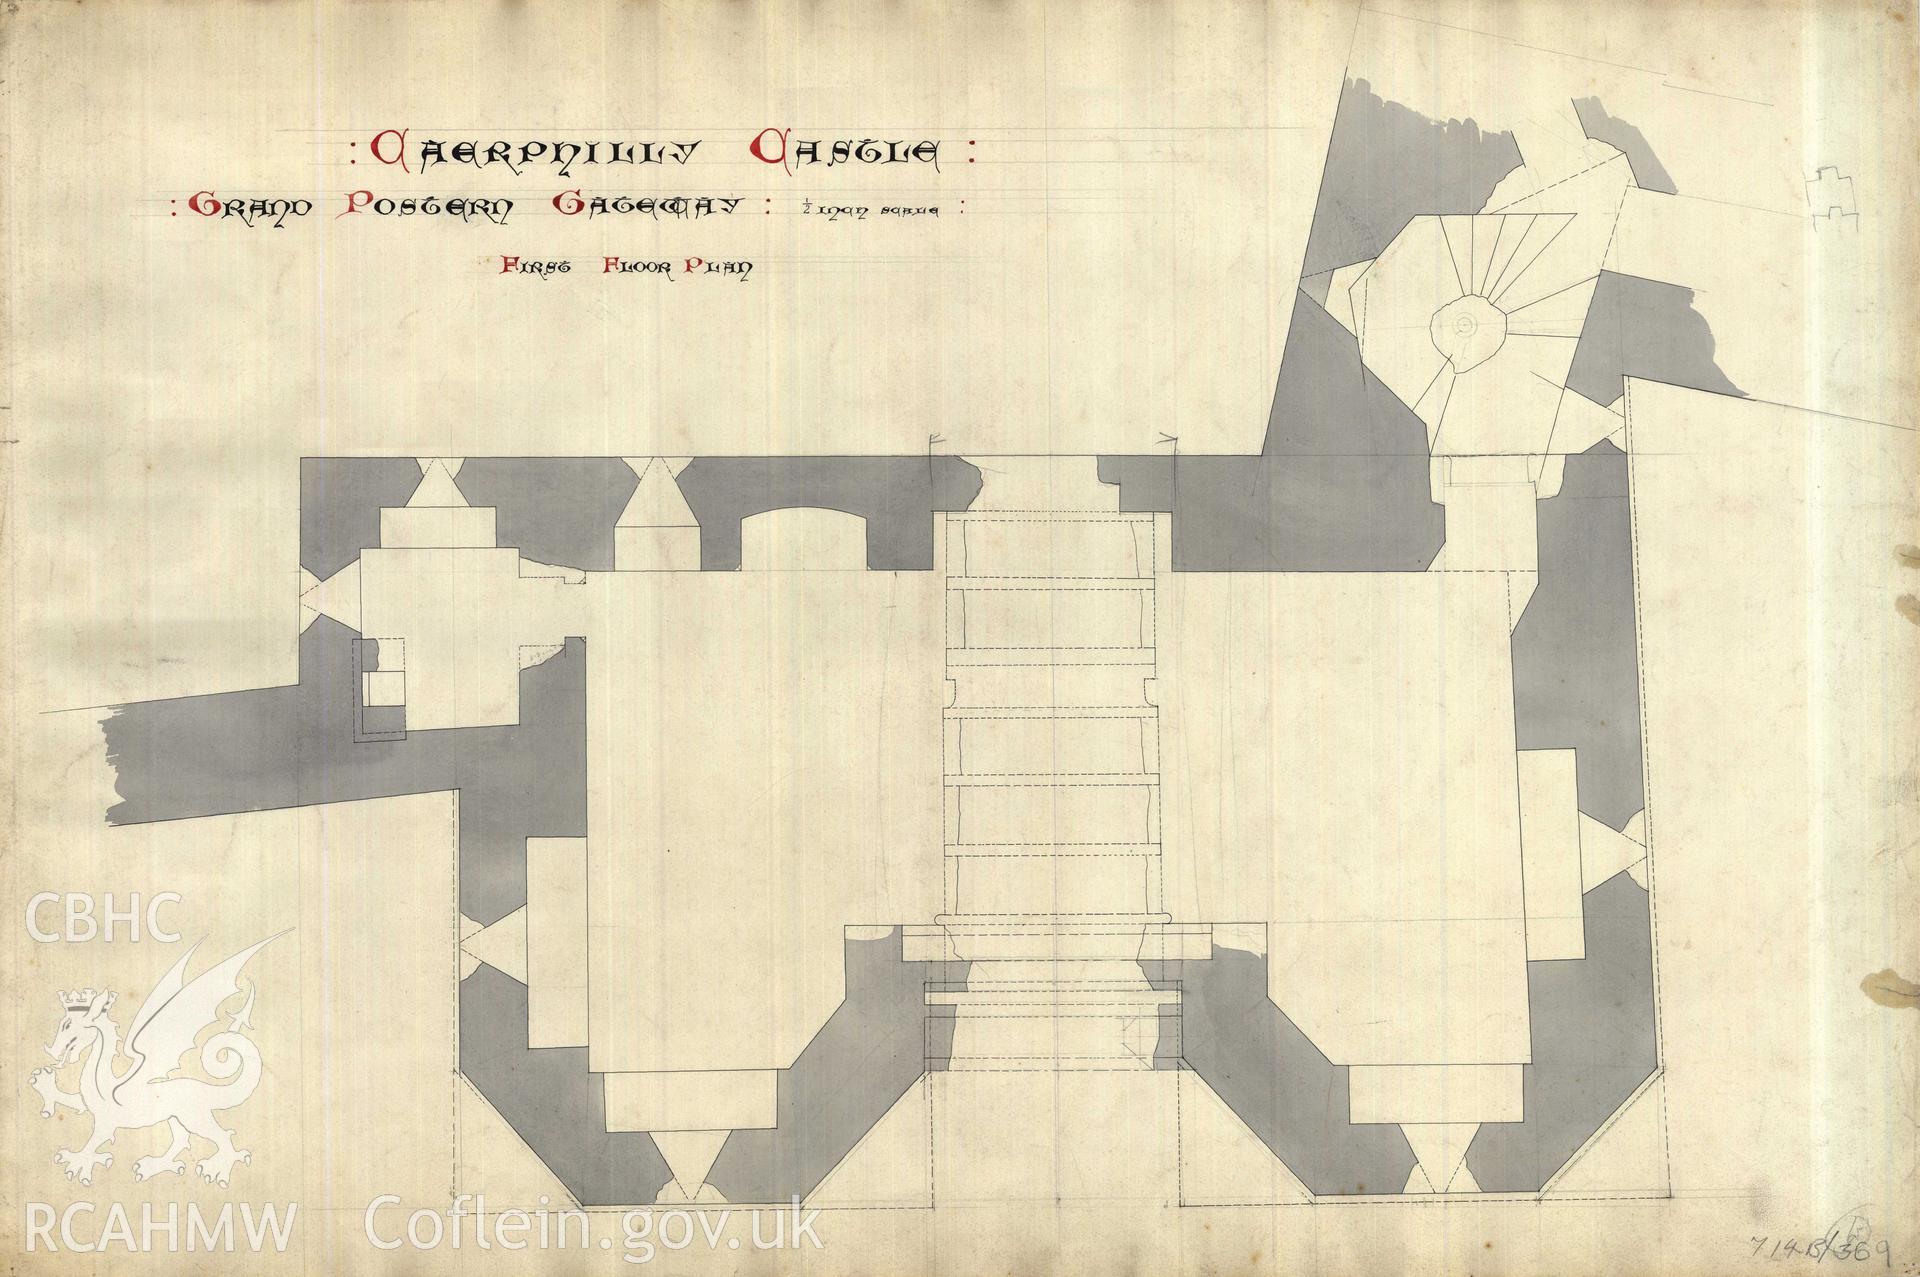 Cadw guardianship monument drawing of Caerphilly Castle. Outer E gate, upper floor plan. Cadw Ref. No:714B/369. Scale 1:24.